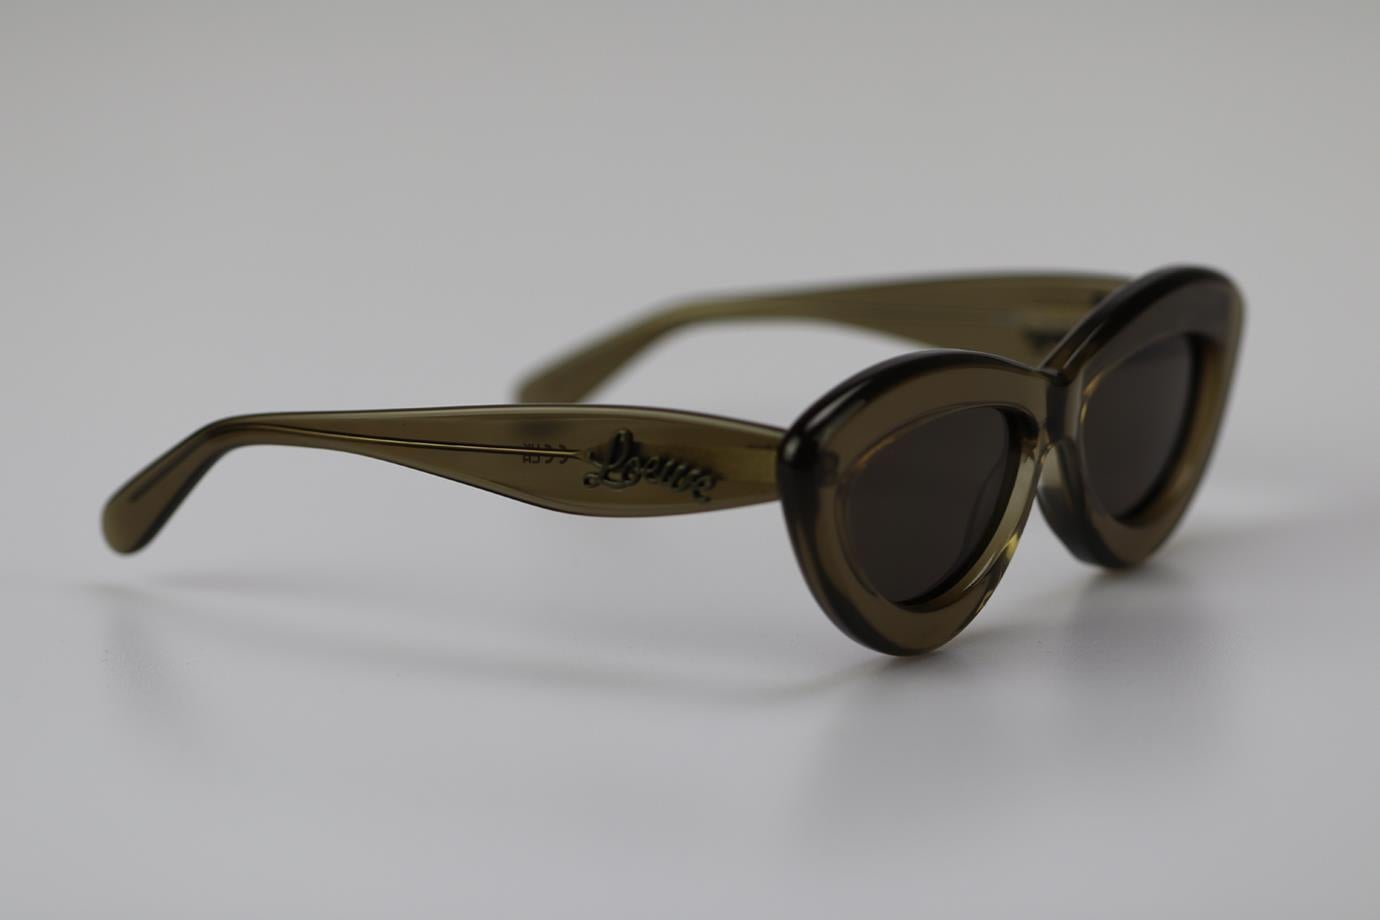 Loewe Cat Eye Acetate Sunglasses. Grey. Does not come with - case. Style code: LW400961. Lens: 54 mm. Arm: 140 mm. Bridge: 14 mm. Condition: Used. Very good condition - Barely worn. No sign of wear; see pictures
